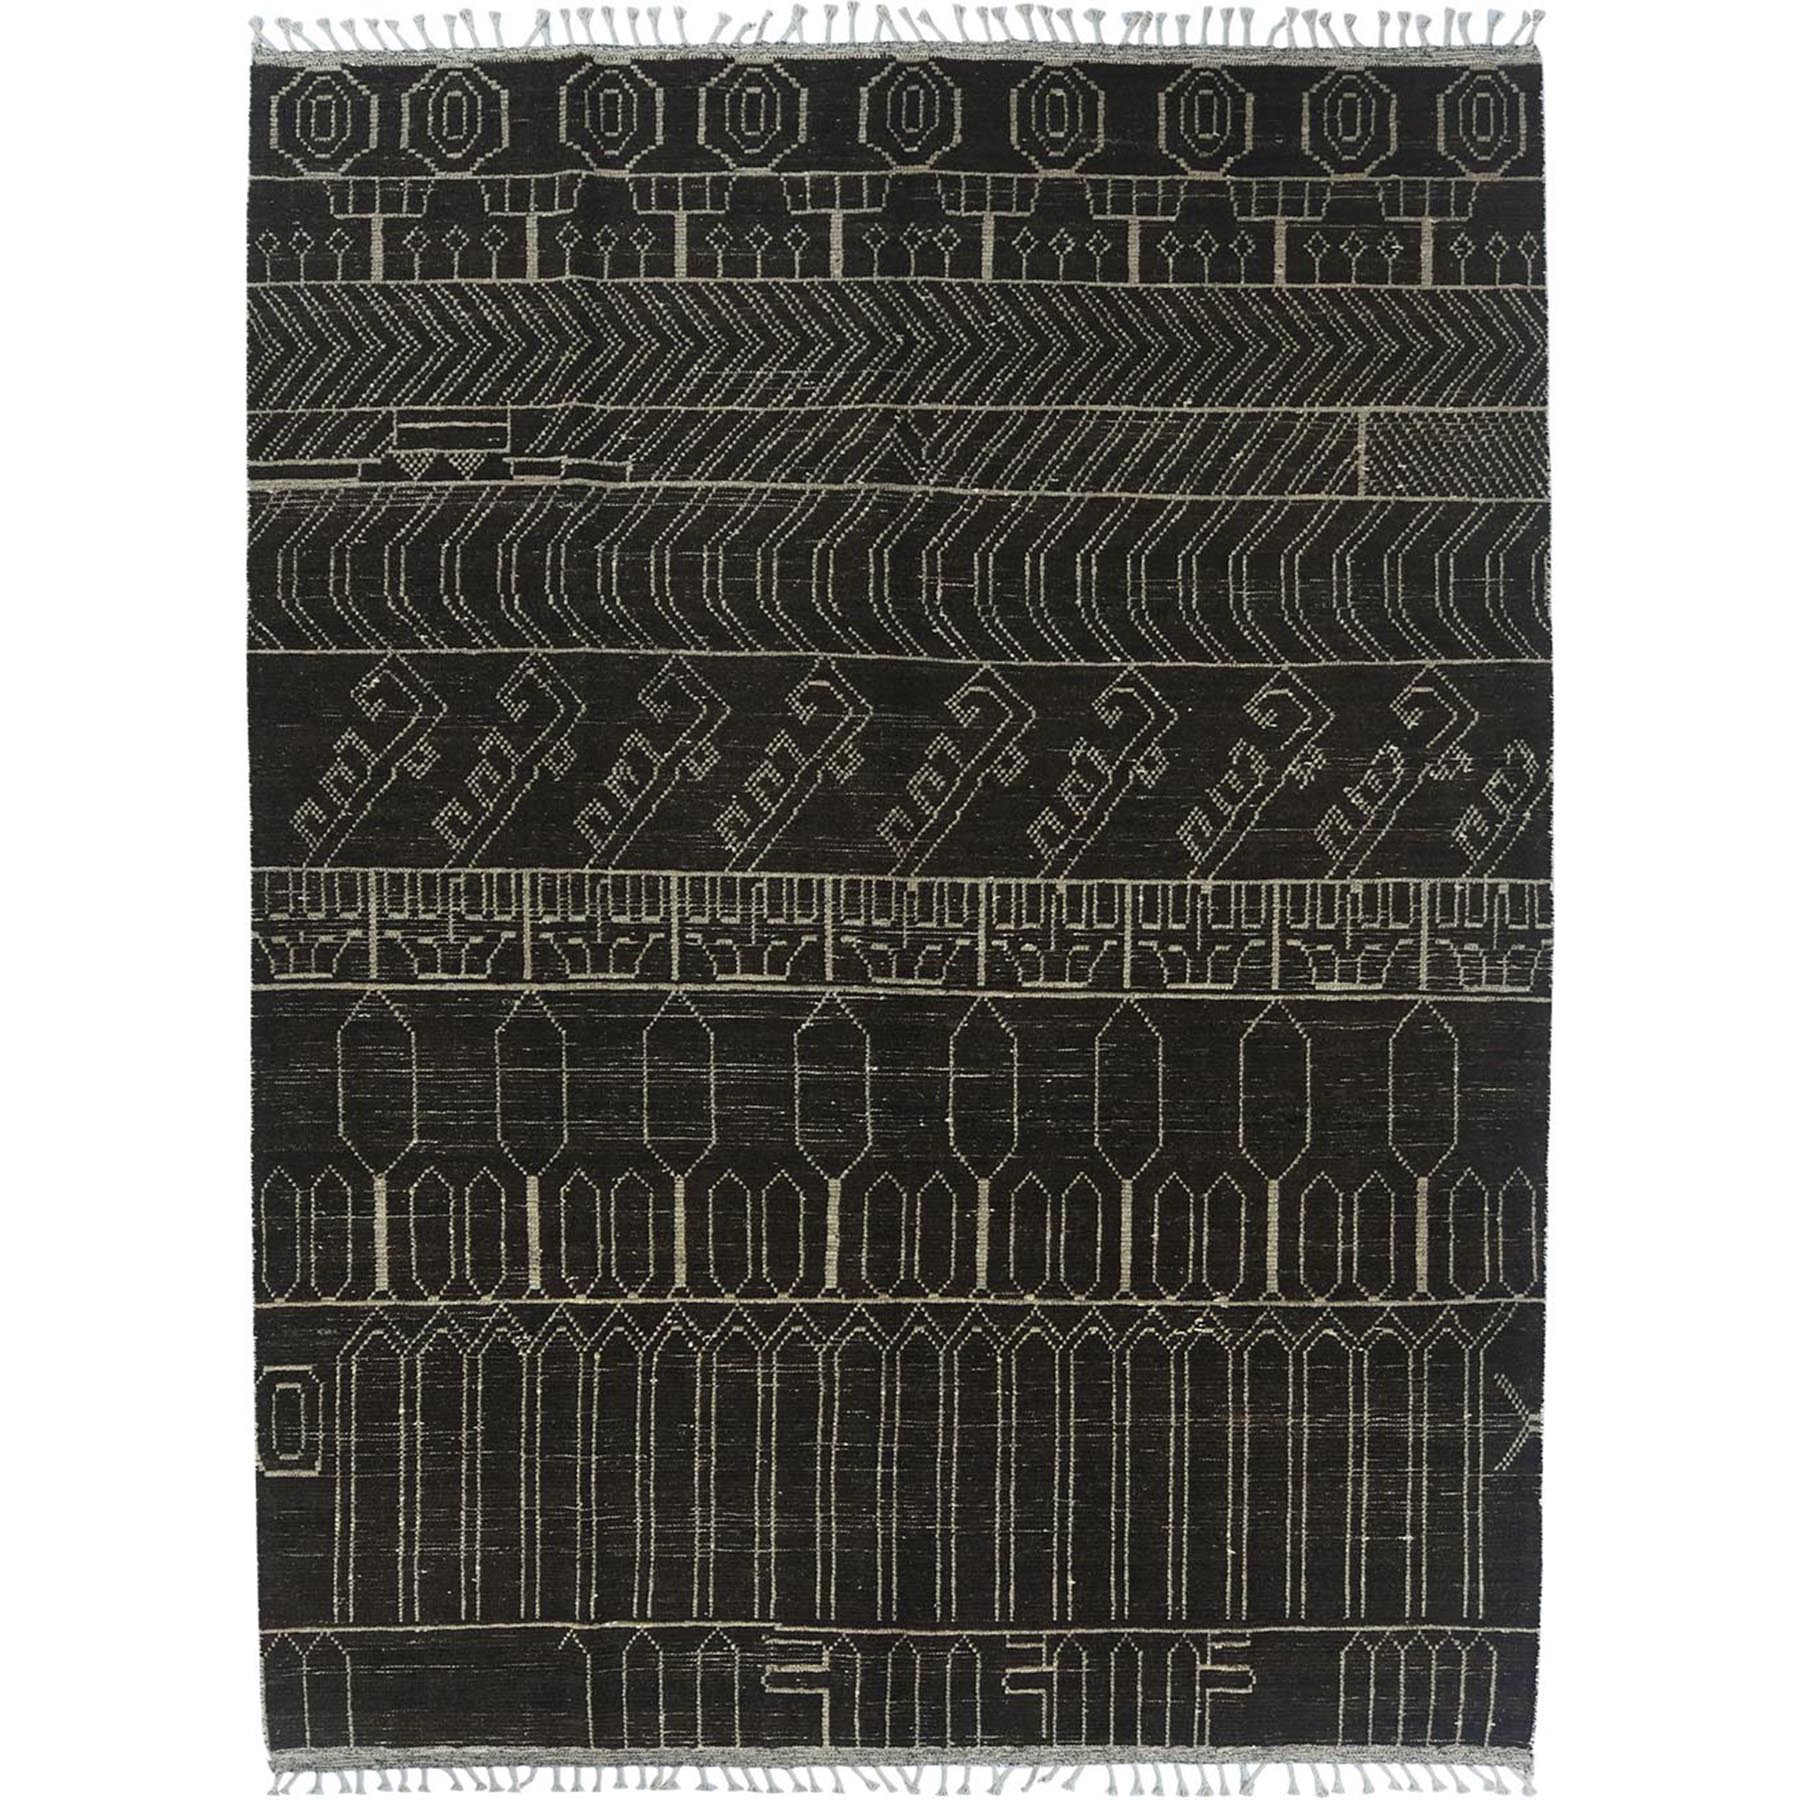 9'2"x12'2" Dark Chocolate Brown, Ben Ourain Moroccan Berber Influence Design, Natural Dyes, Extra Soft Wool, Hand Woven Oriental Rug 